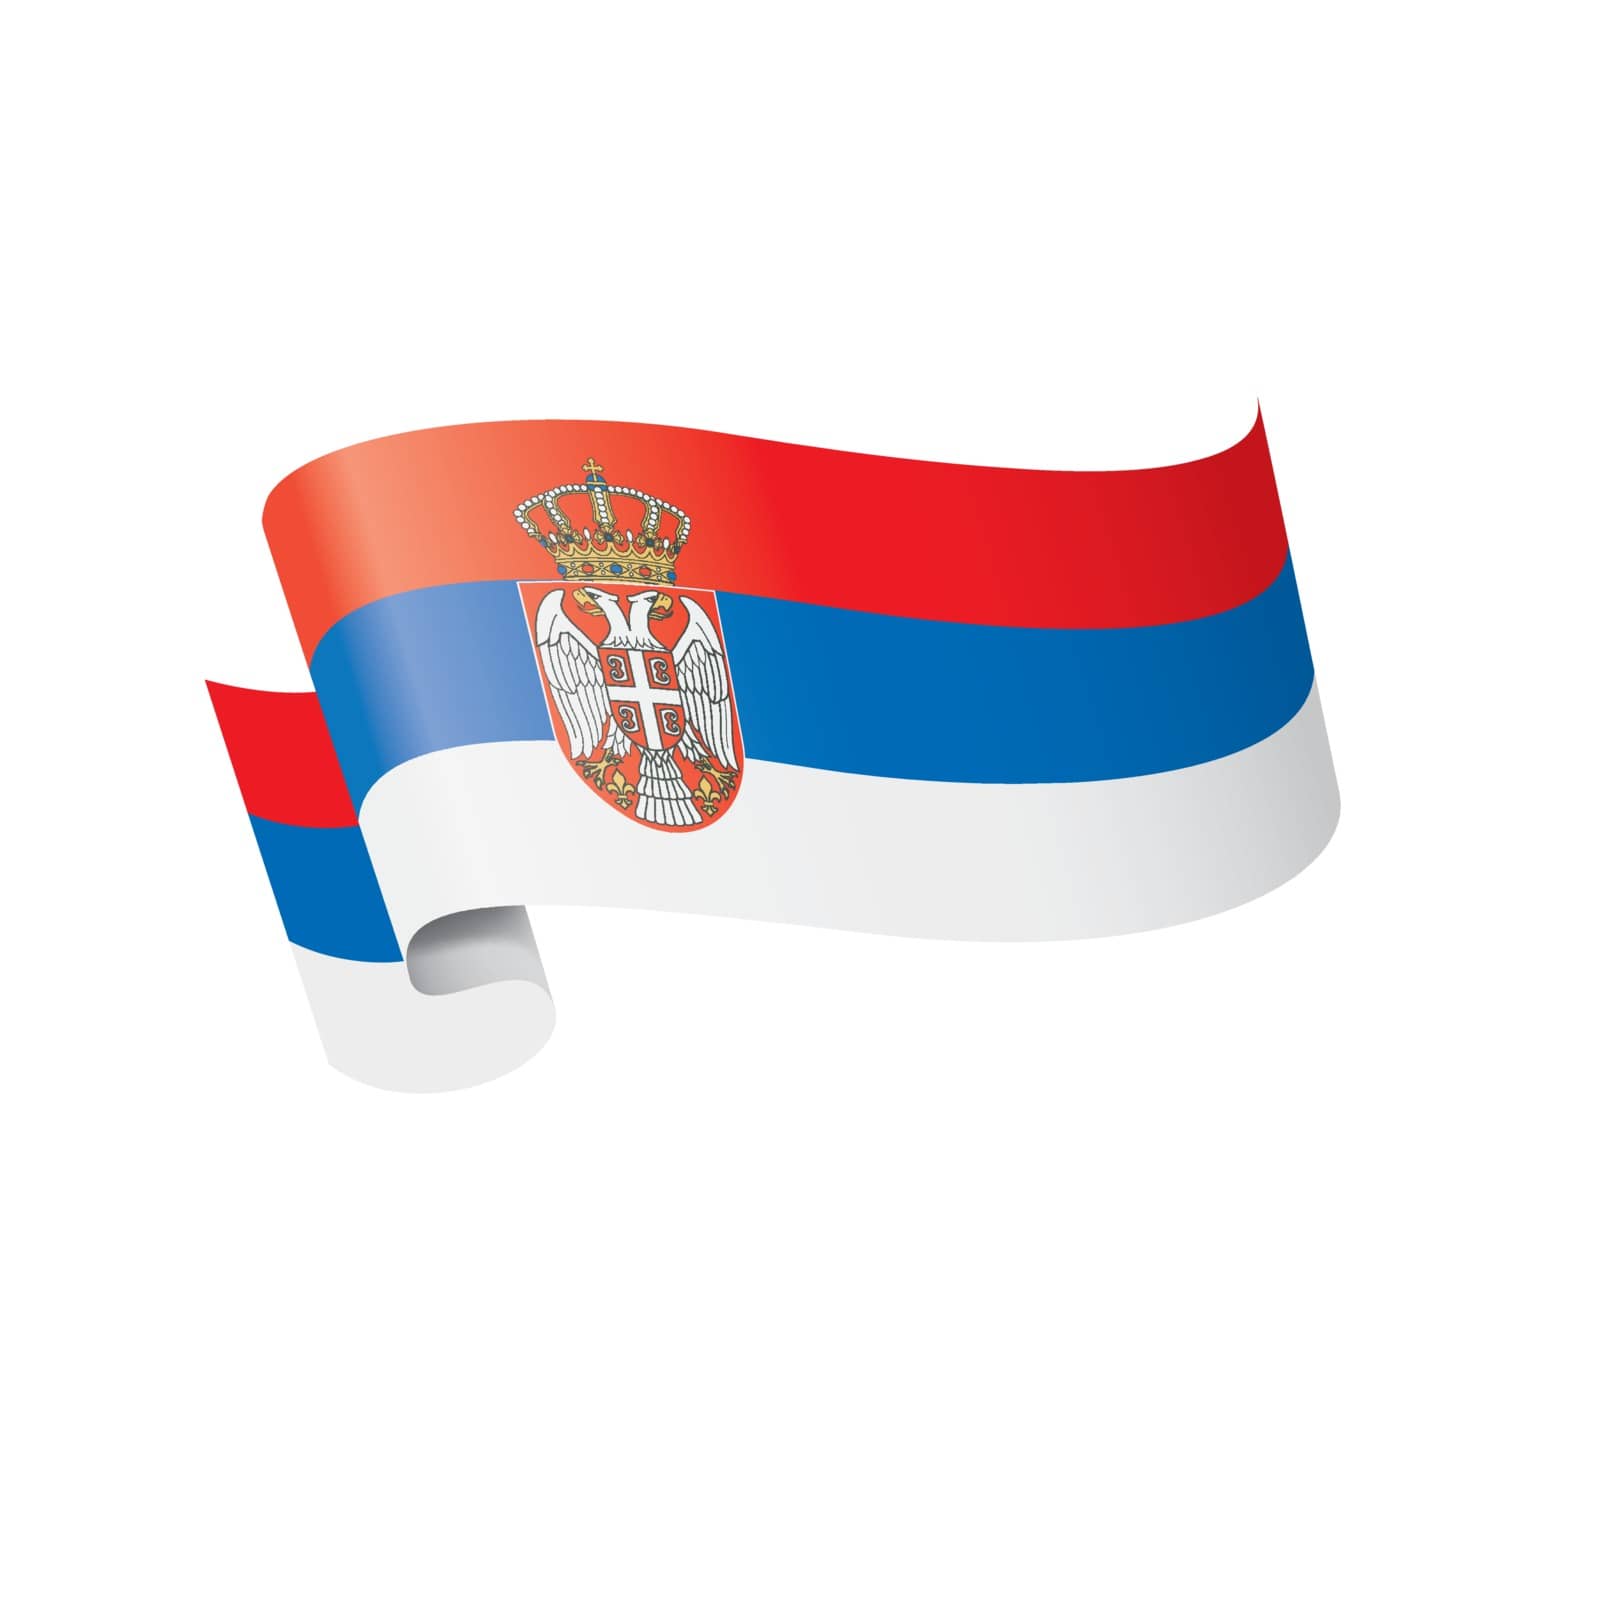 Serbia national flag, vector illustration on a white background